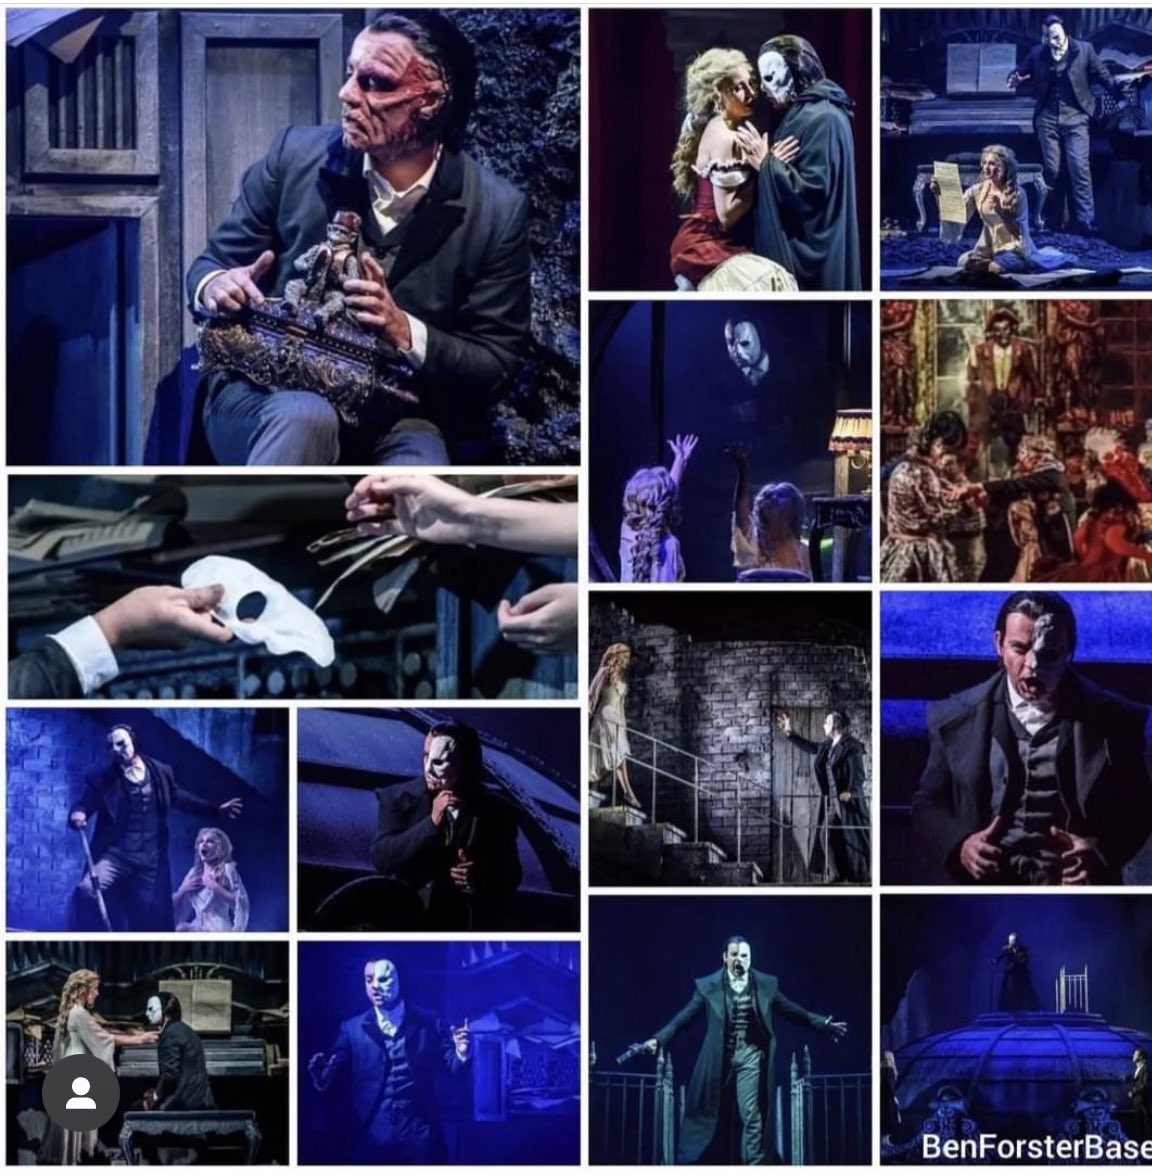 A lovely #ForsterFlashback today! Phantom of the Opera Greece began 4 years ago. Our brilliant Phantom @thebenforster lead an amazing British/Greek cast. Unfortunately the highly successful run had to end prematurely because of the Covid outbreak. 😪